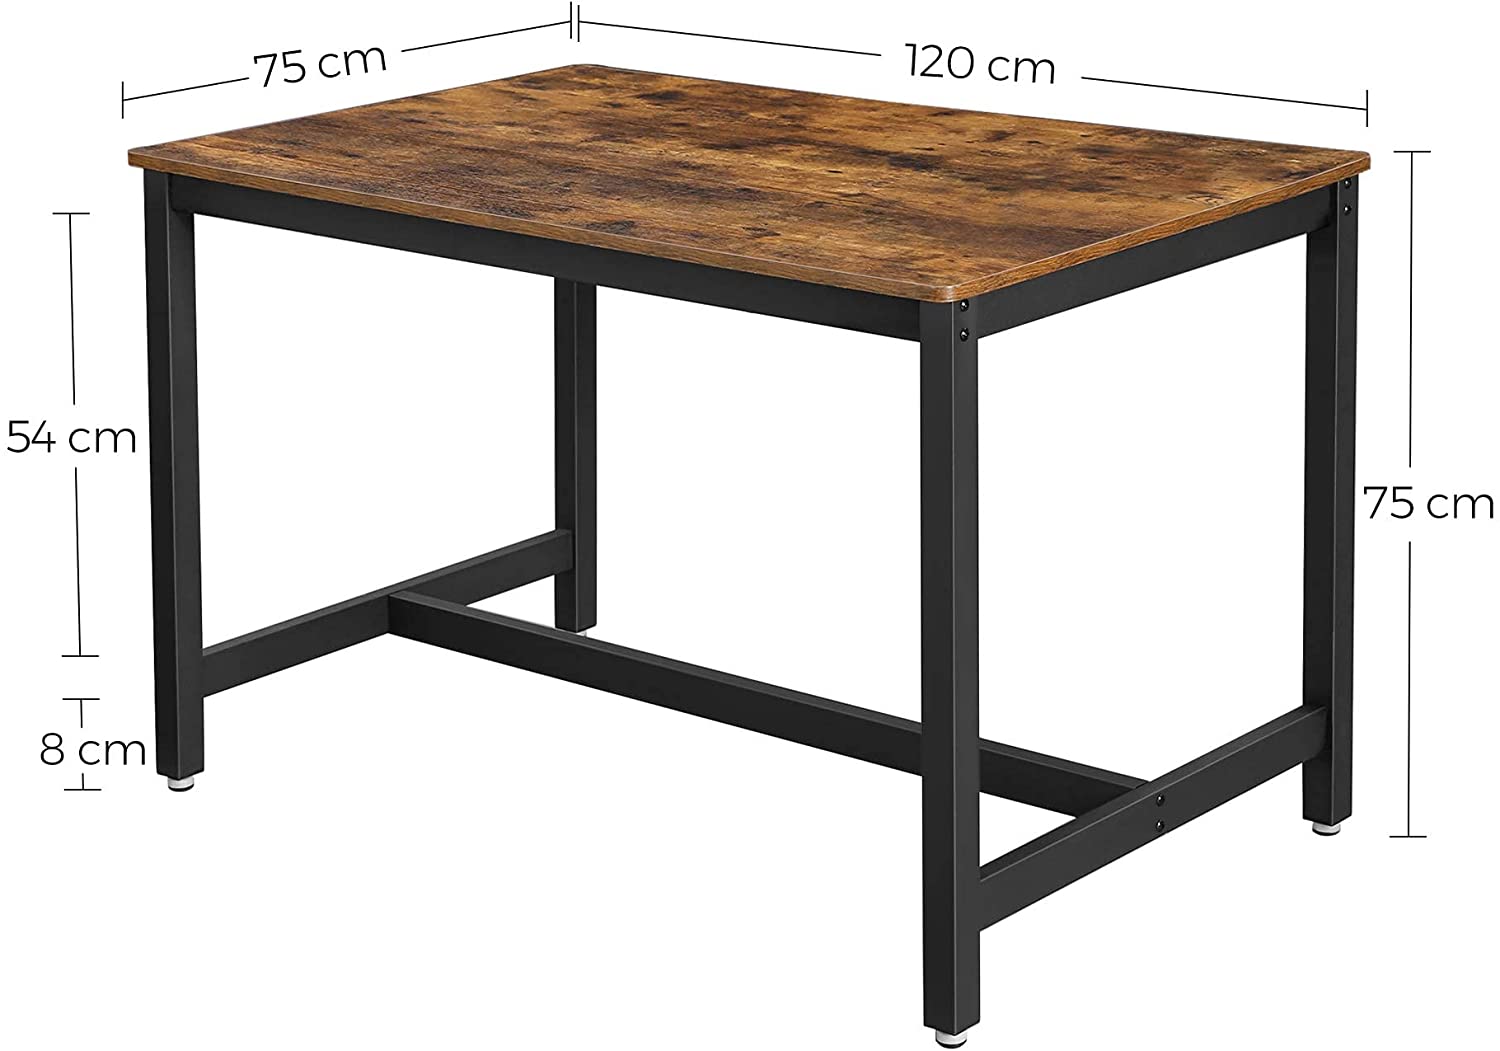 Dining Table for 4 People, Kitchen Table, 120 x 75 x 75 cm, Heavy Duty metal Frame, Industrial Style, for Living Room, Dining Room, Rustic Brown KDT75X RAW58.dk 